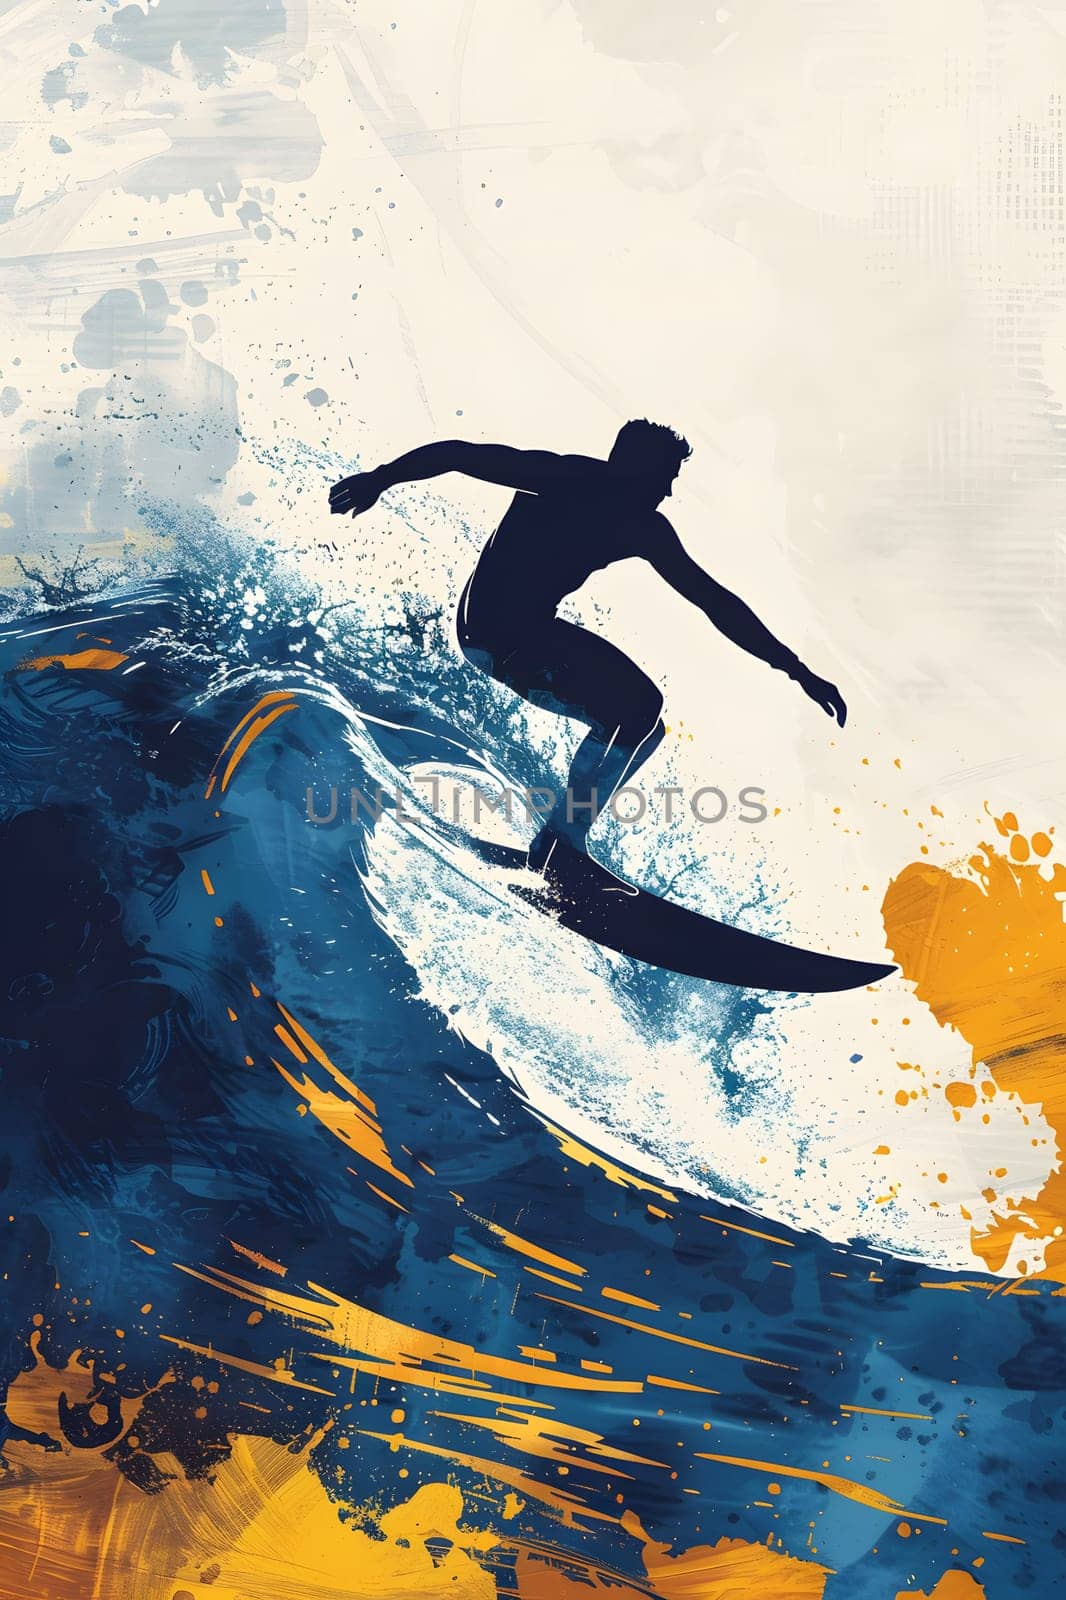 A man is surfing a wave on a surfboard in the ocean by Nadtochiy